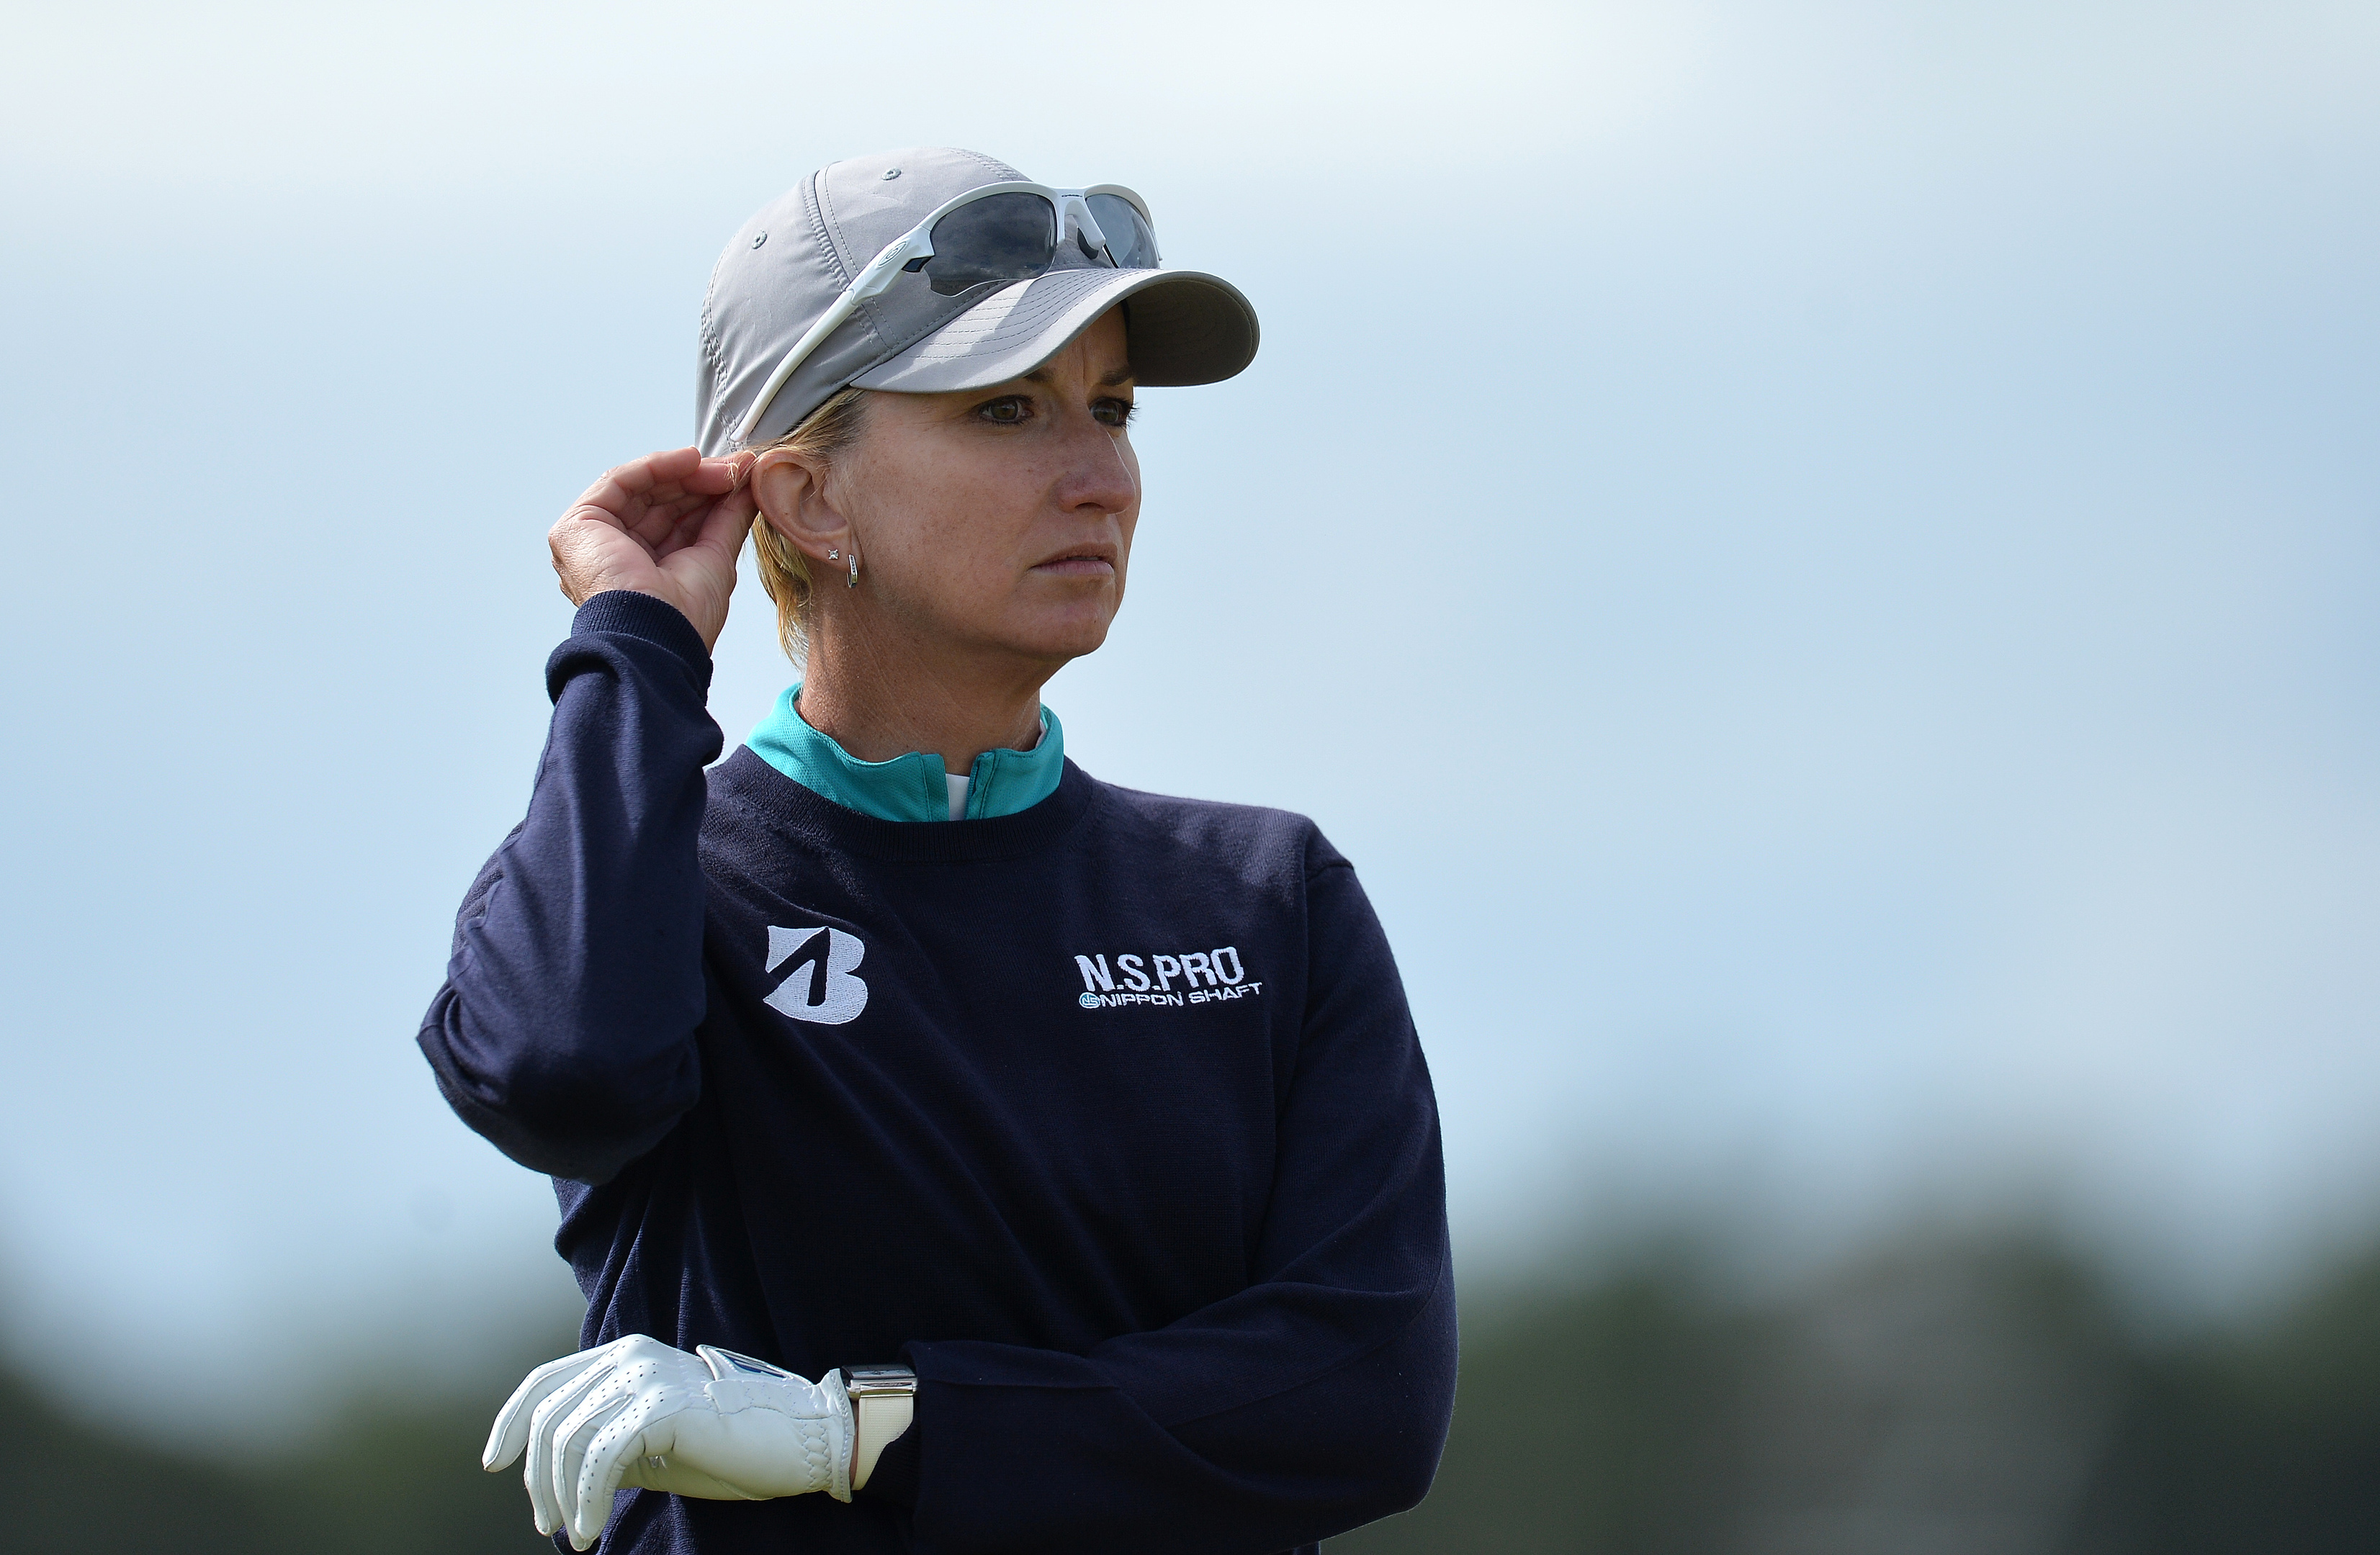 Karrie Webb waits to play at the 17th hole during the first day of the Aberdeen Asset Management Ladies Scottish Open at Dundonald Links.